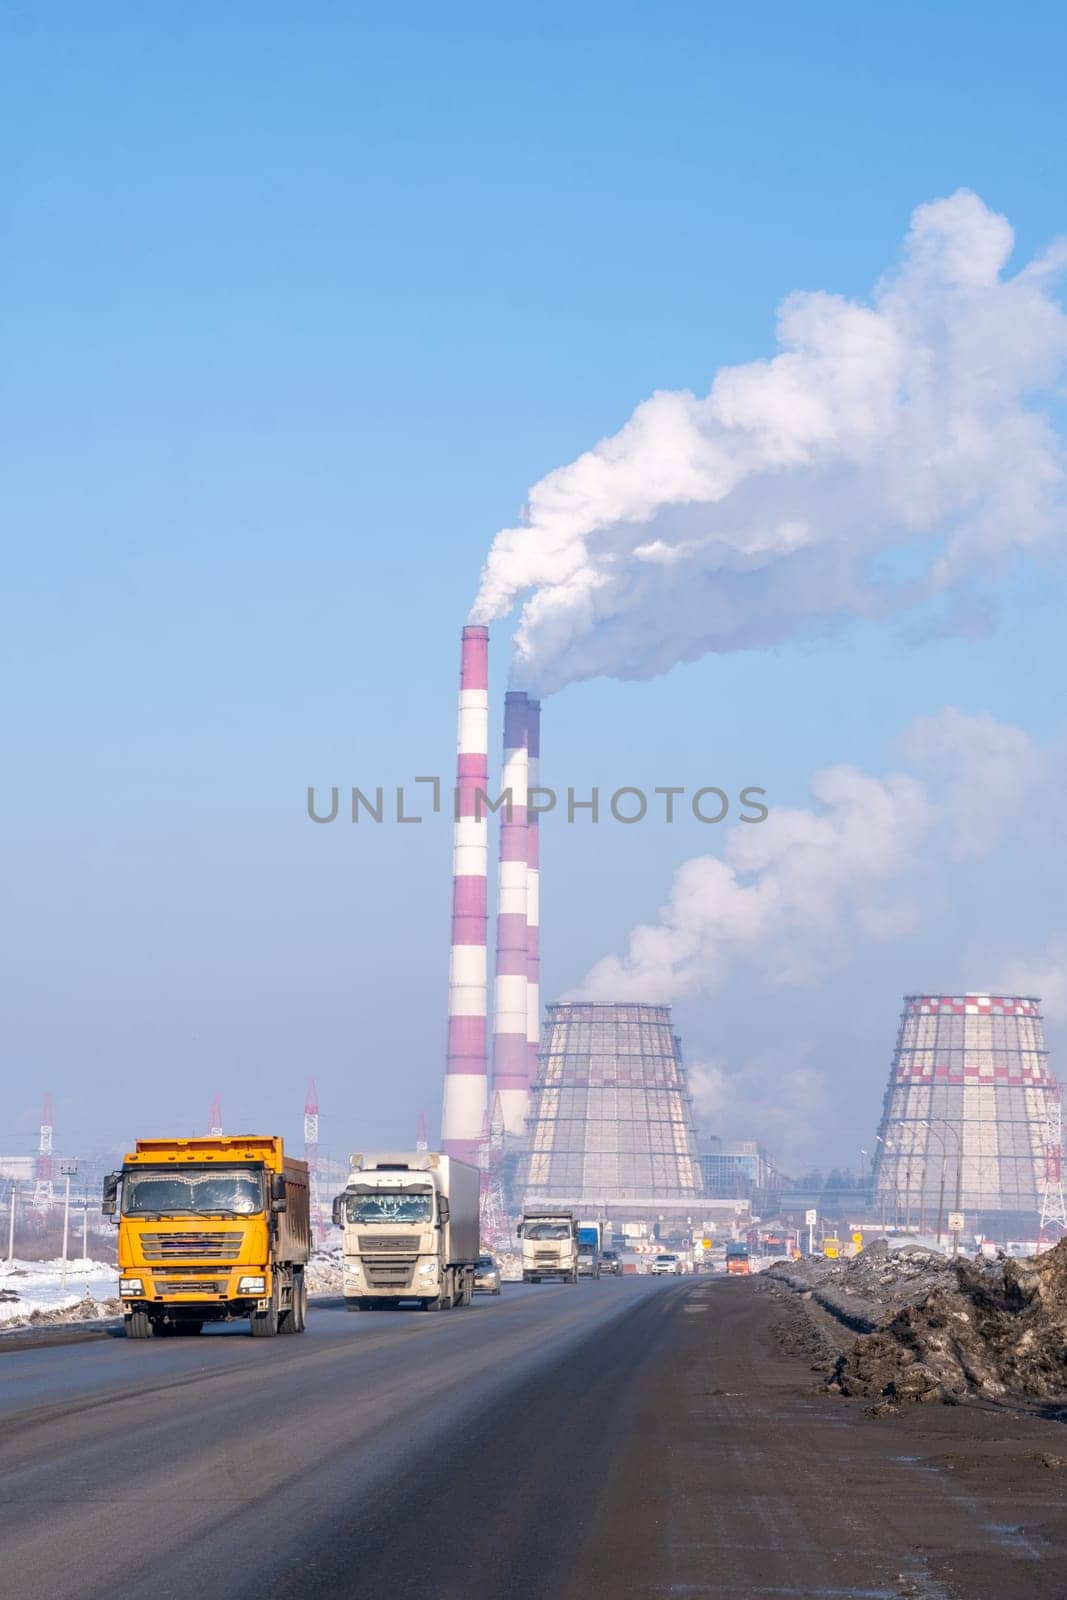 Naberezhnye Chelny, Russia, March 2, 2024. A convoy of vehicles drives down the asphalt road past the factory, smoke billowing from the chimneys into the sky.